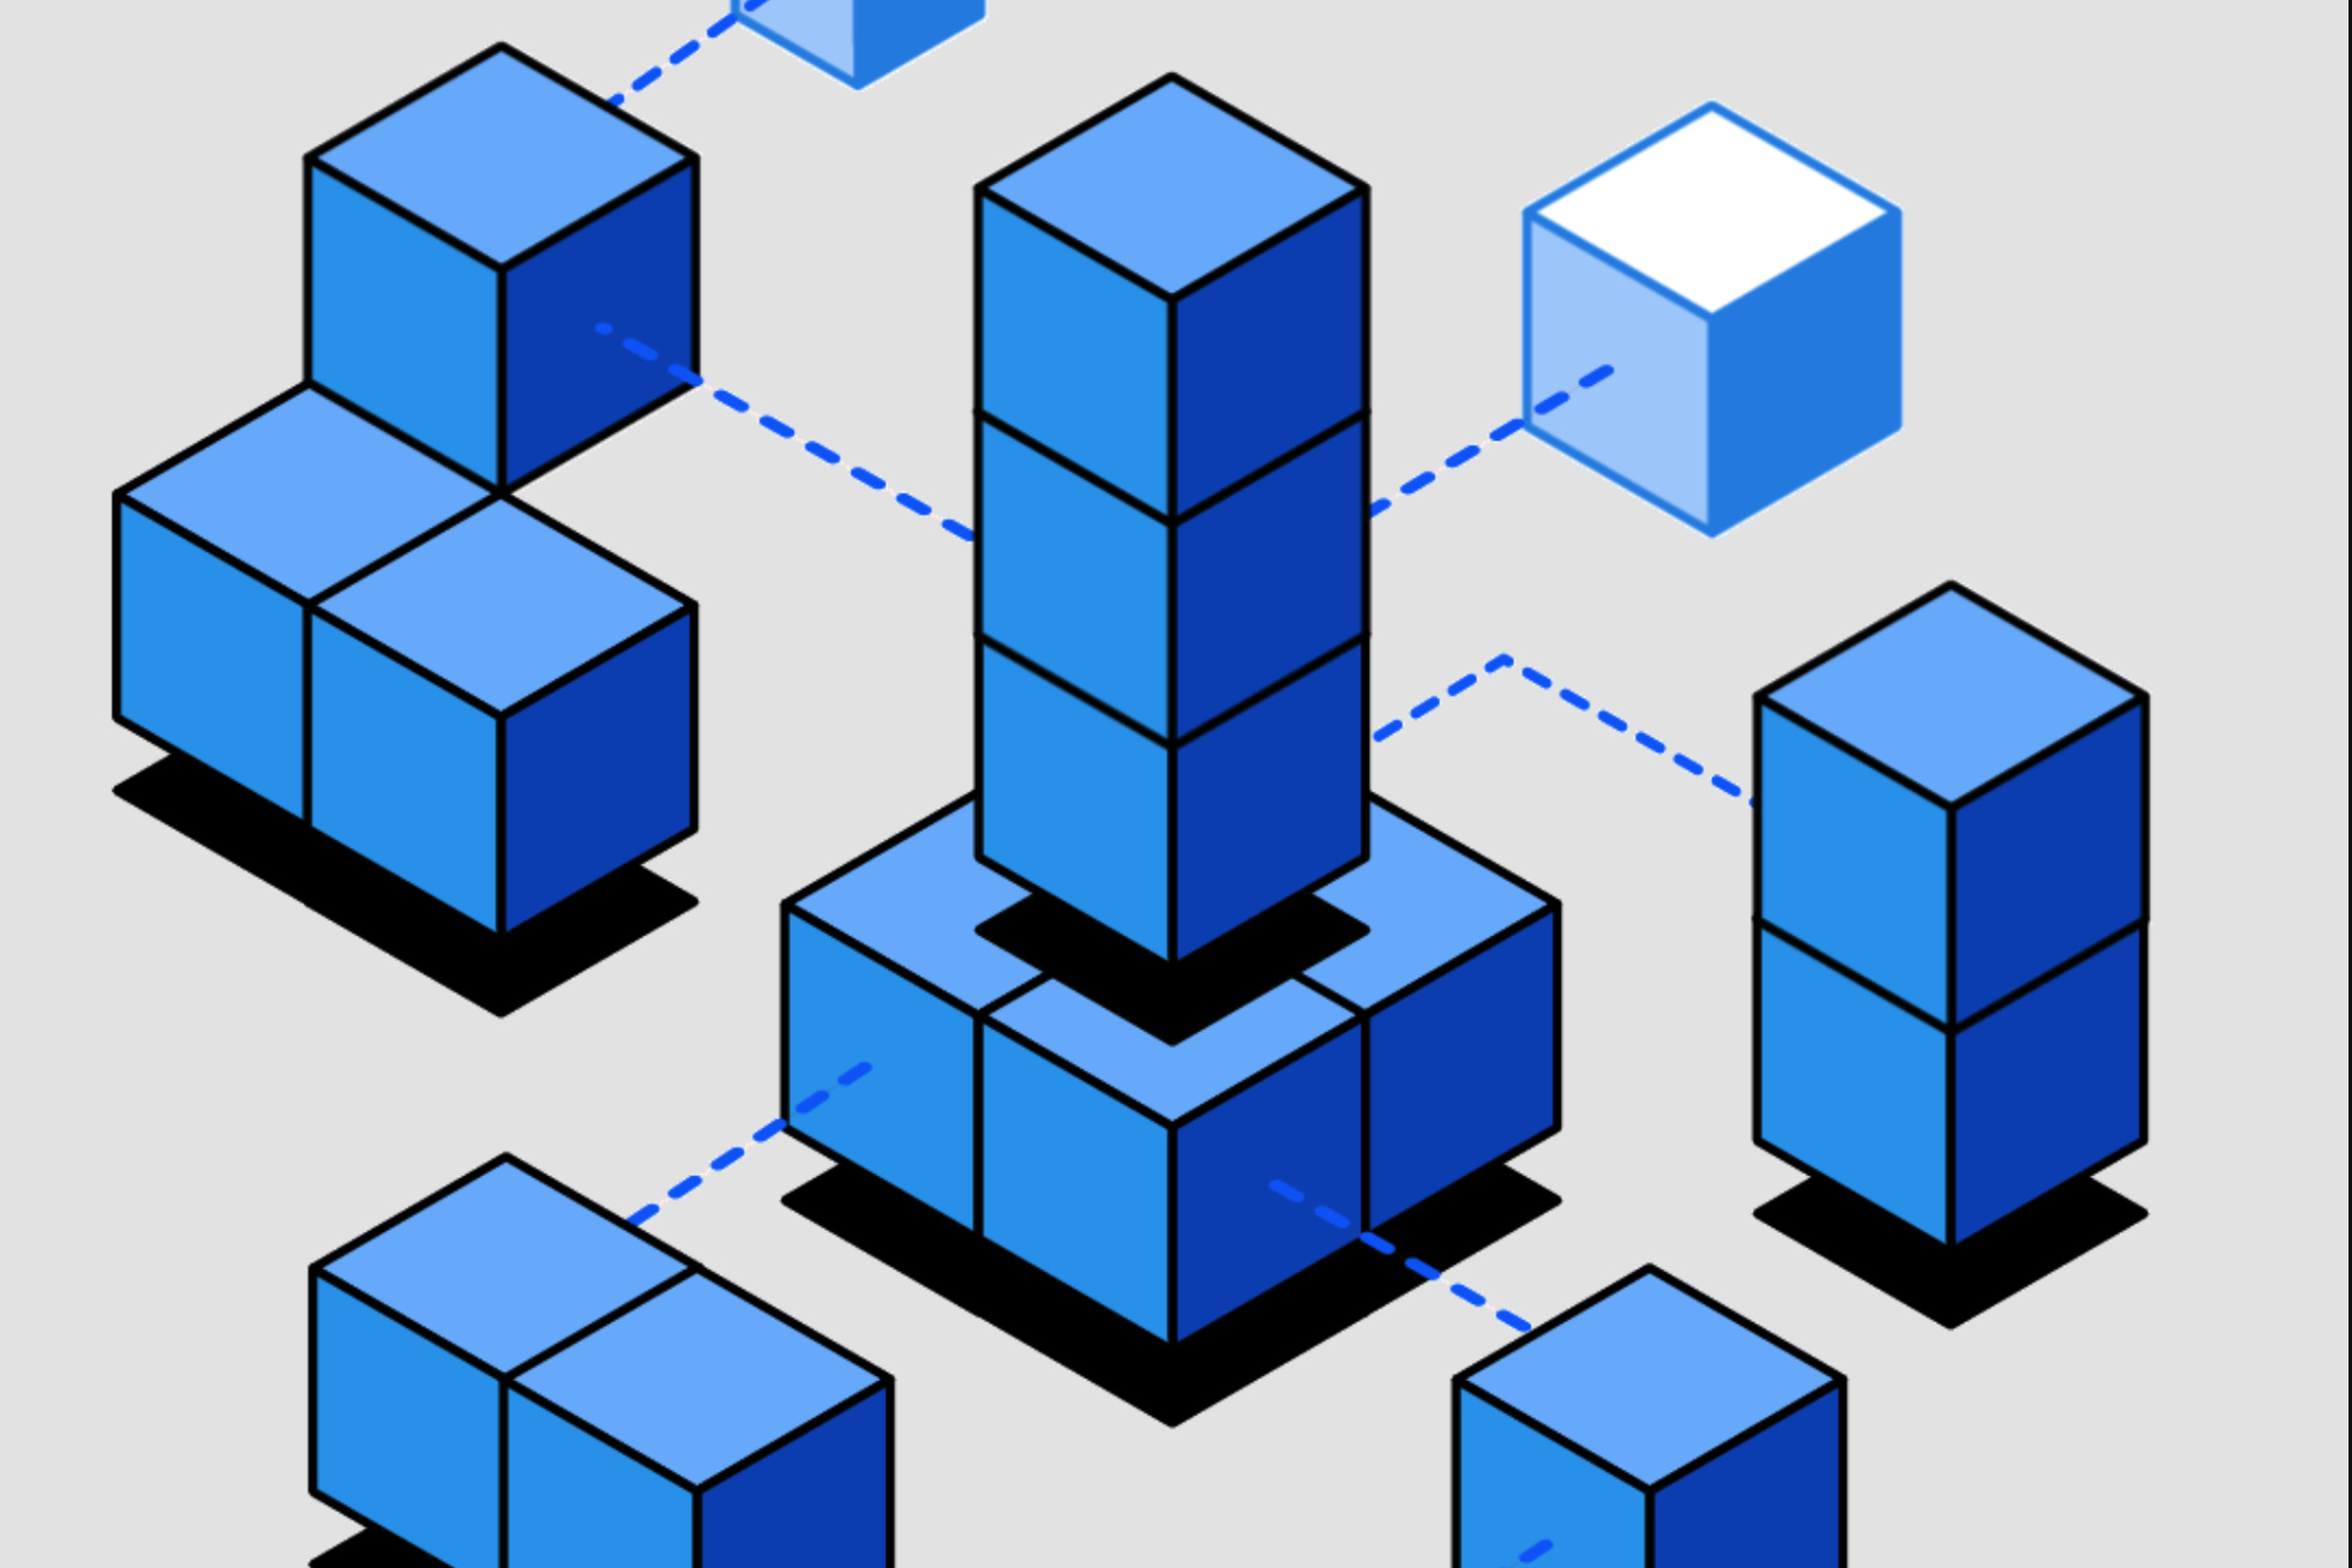 A series of blue cubes representing Project Bluesky.